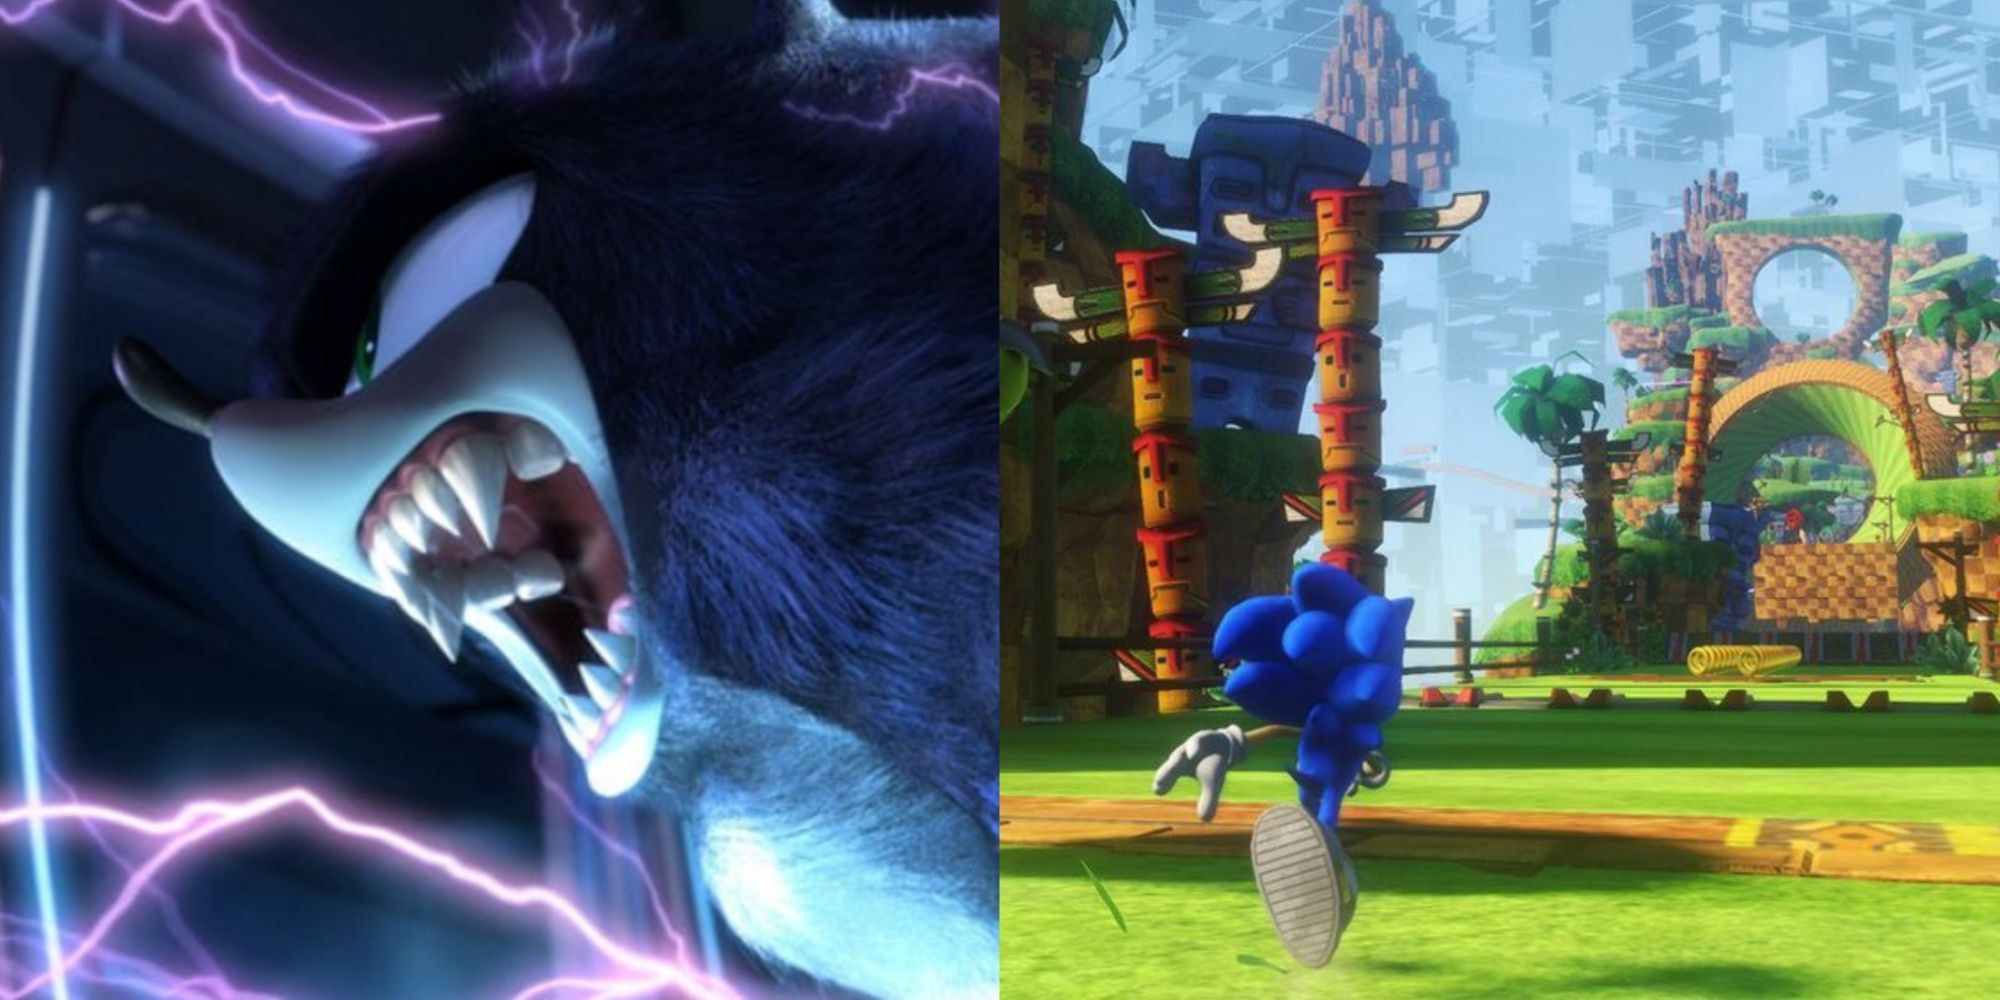 Longest Sonic Games Featured Split Image Sonic Unleashed and Sonic Frontiers